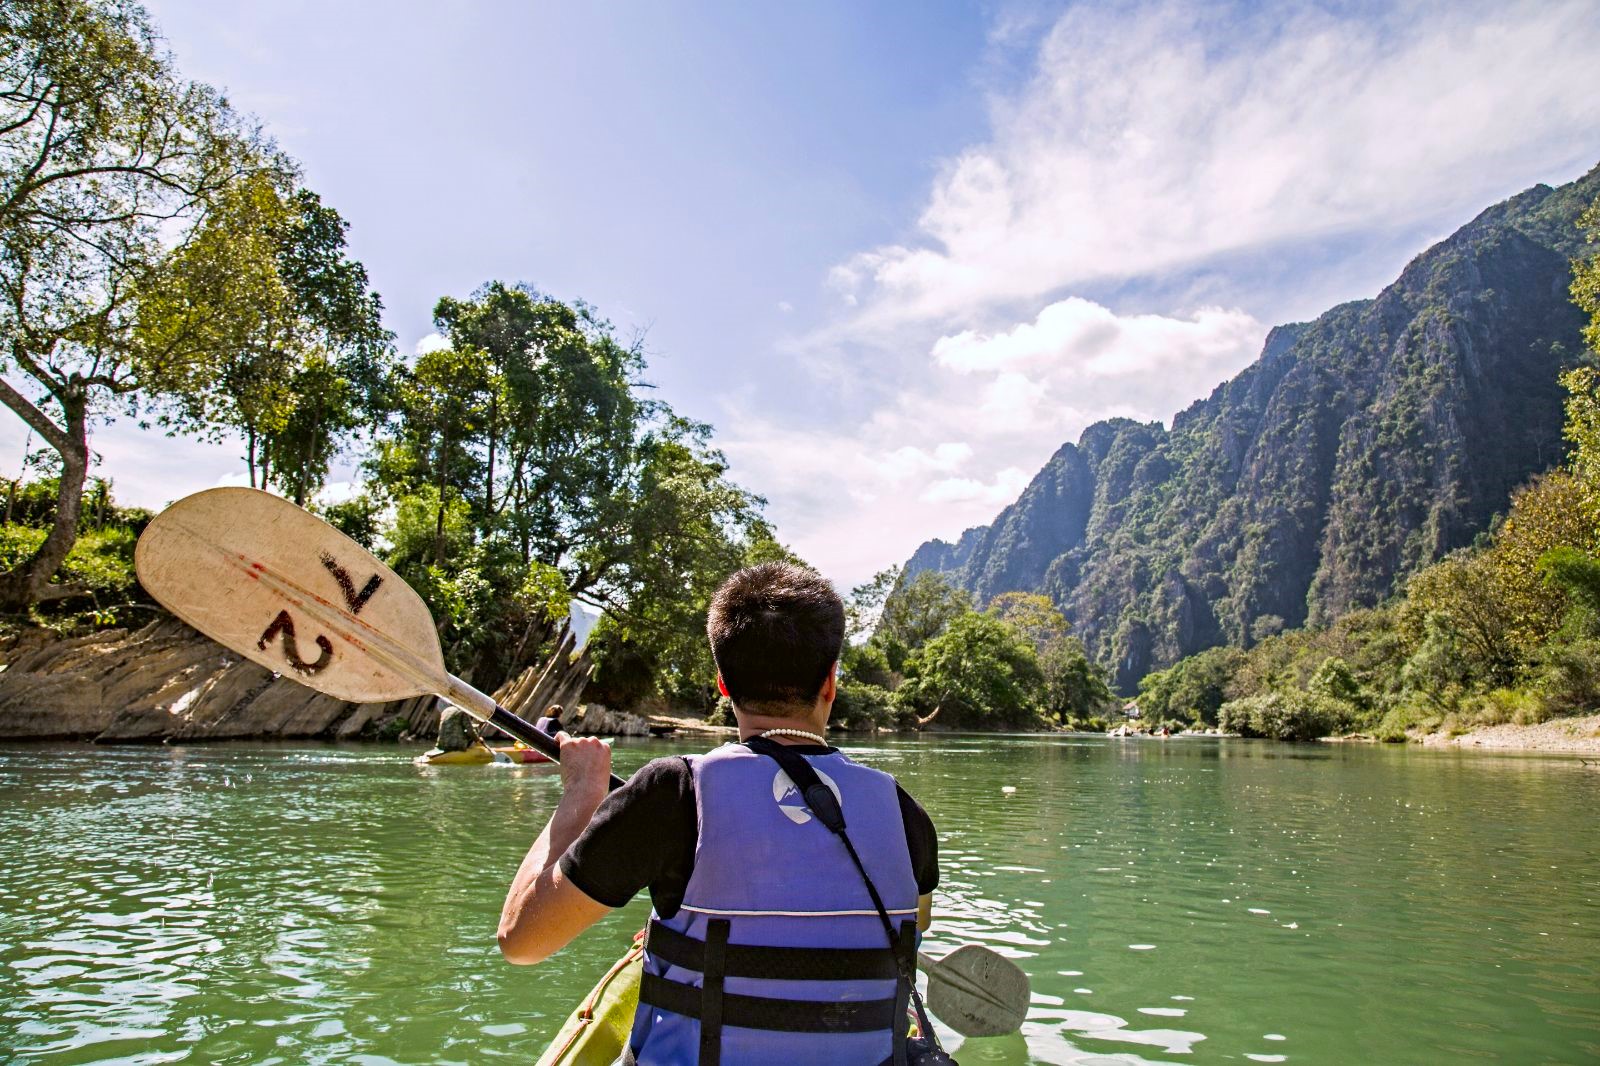 Kayaking on the upper mekong in laos from te Anouving cruise ship